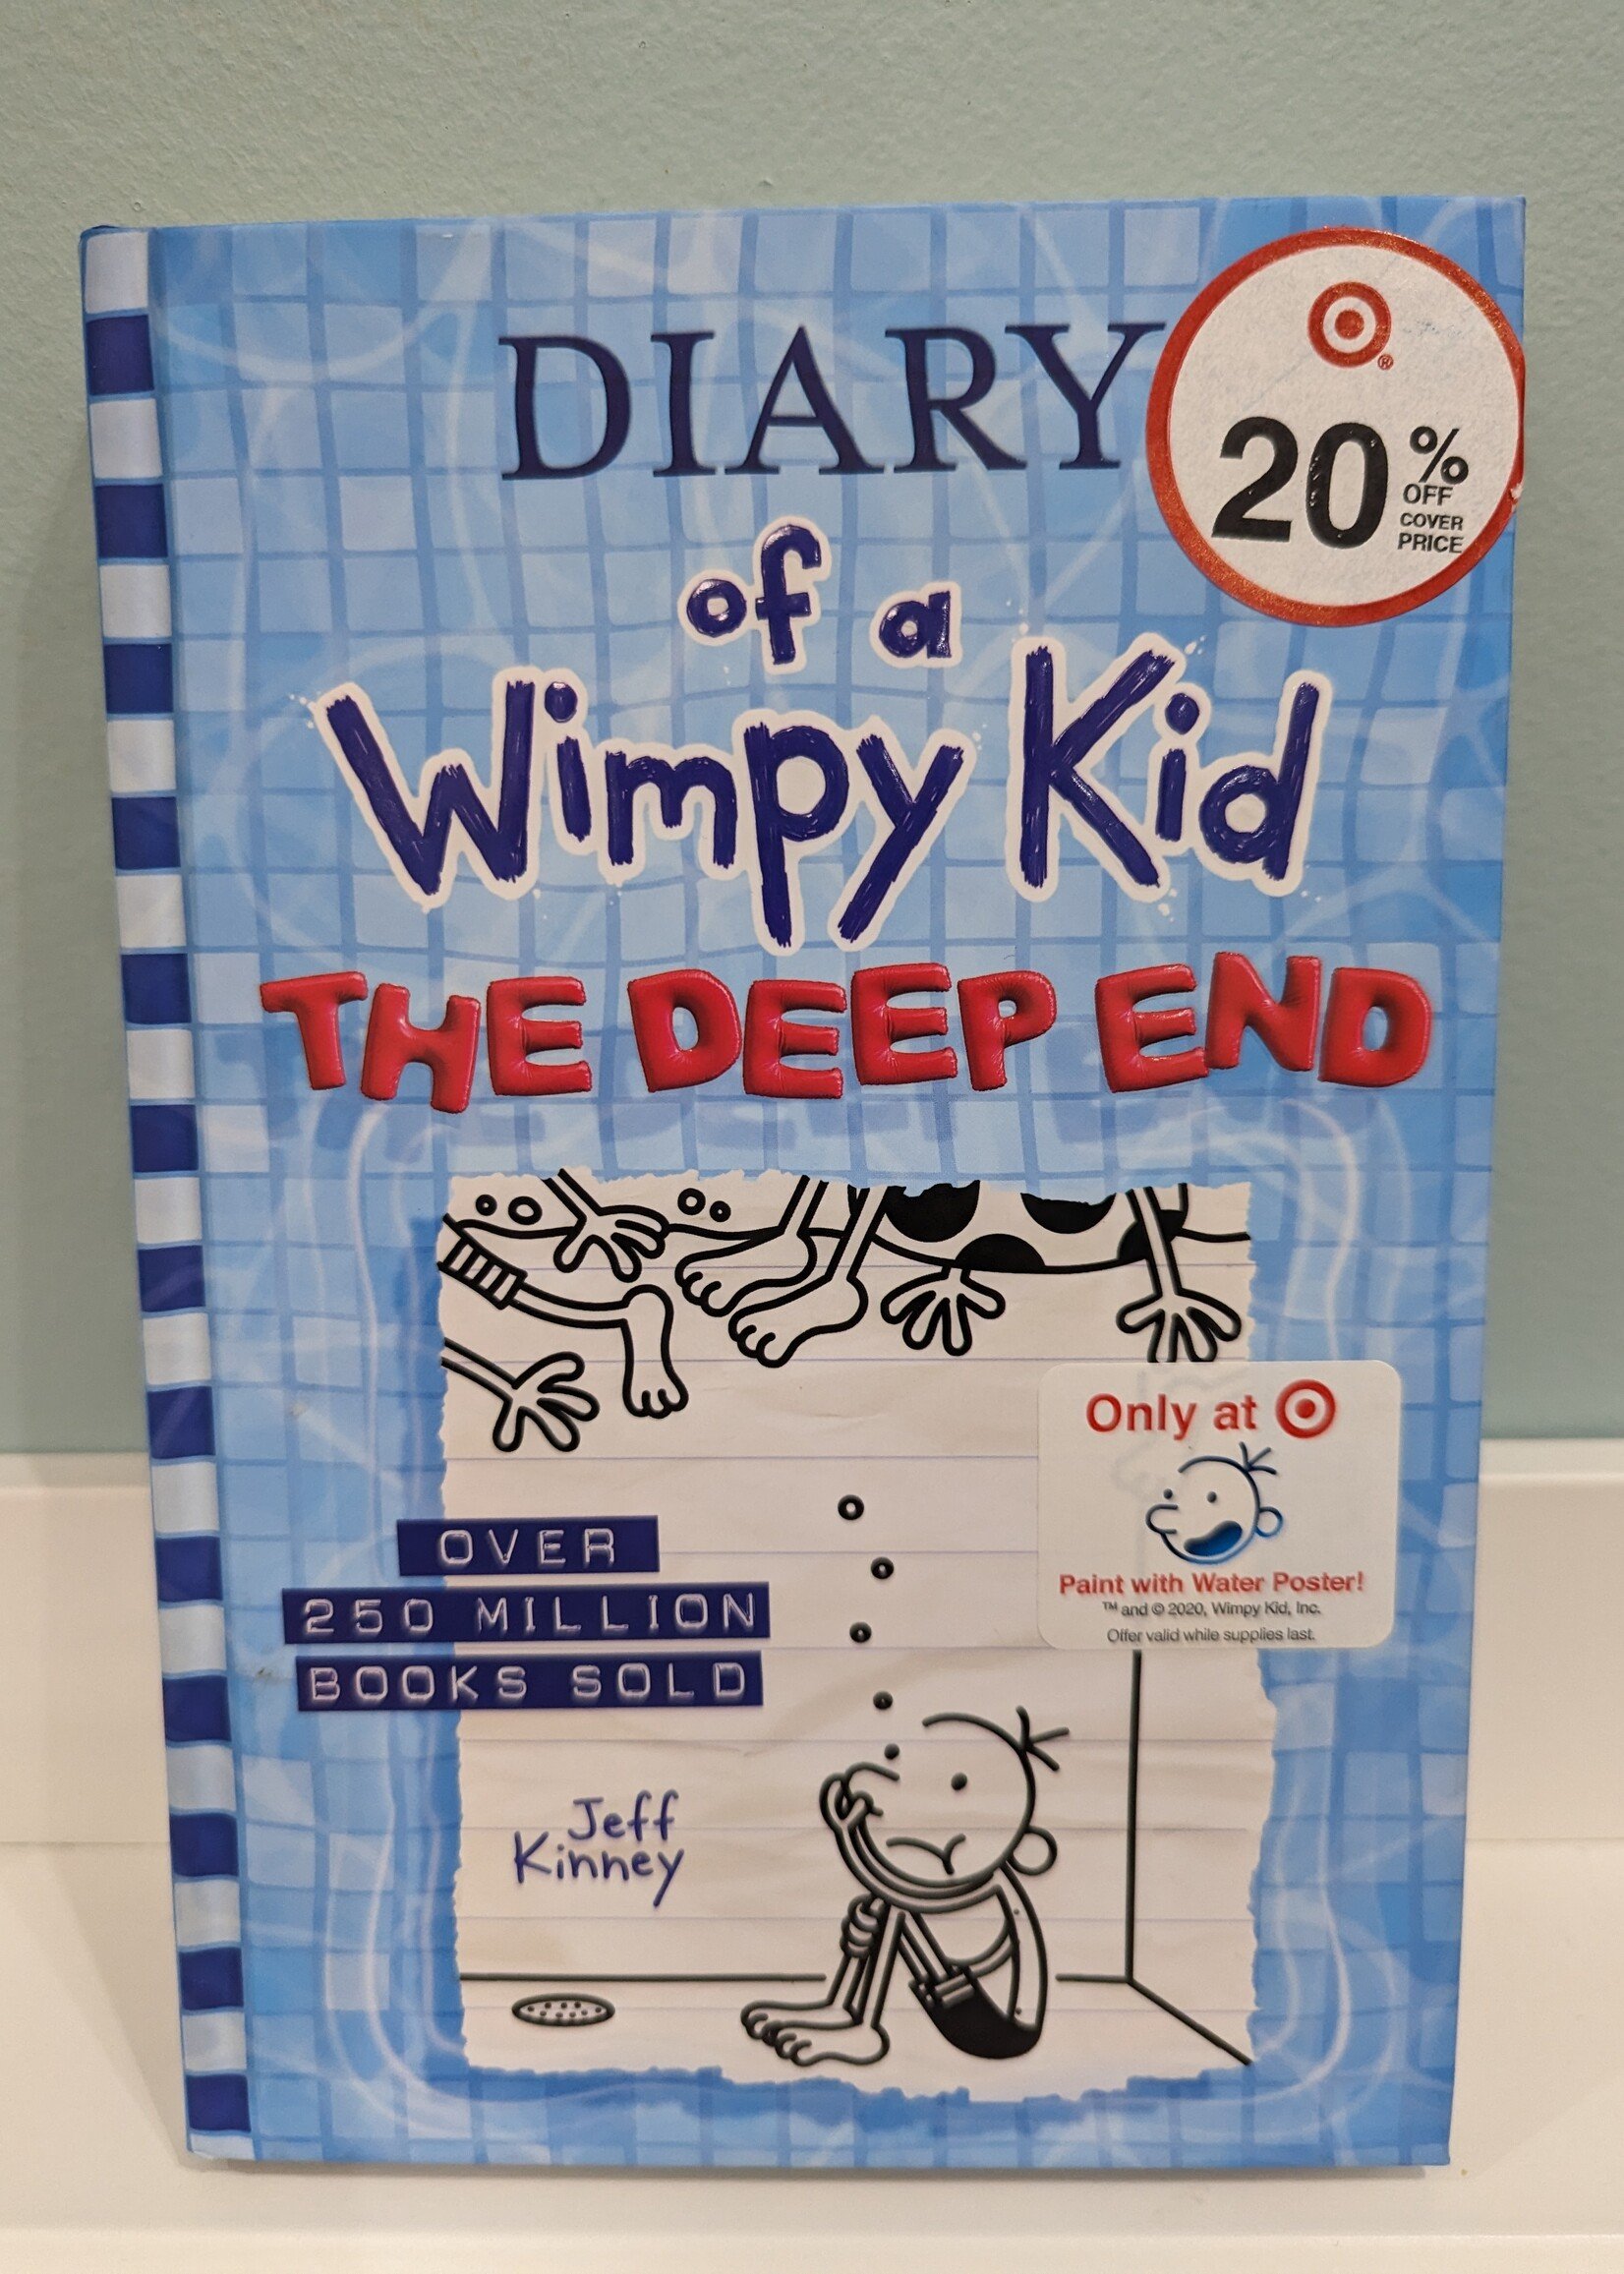 Abrams Books Diary of a Wimpy Kid: The Deep End#15